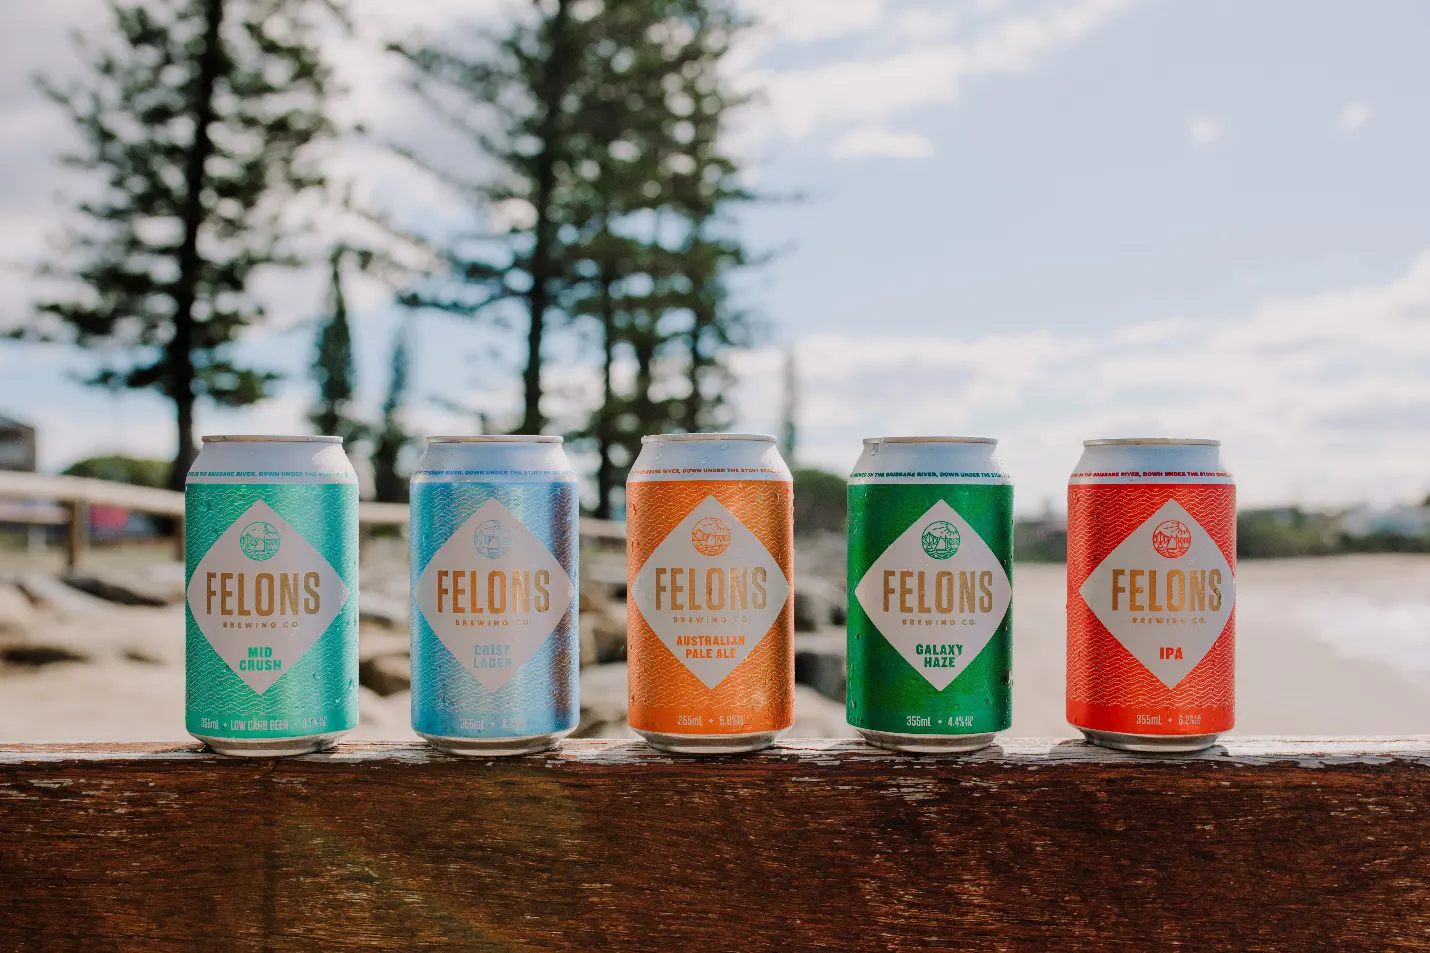 A glowing review from Felons Brewing Company